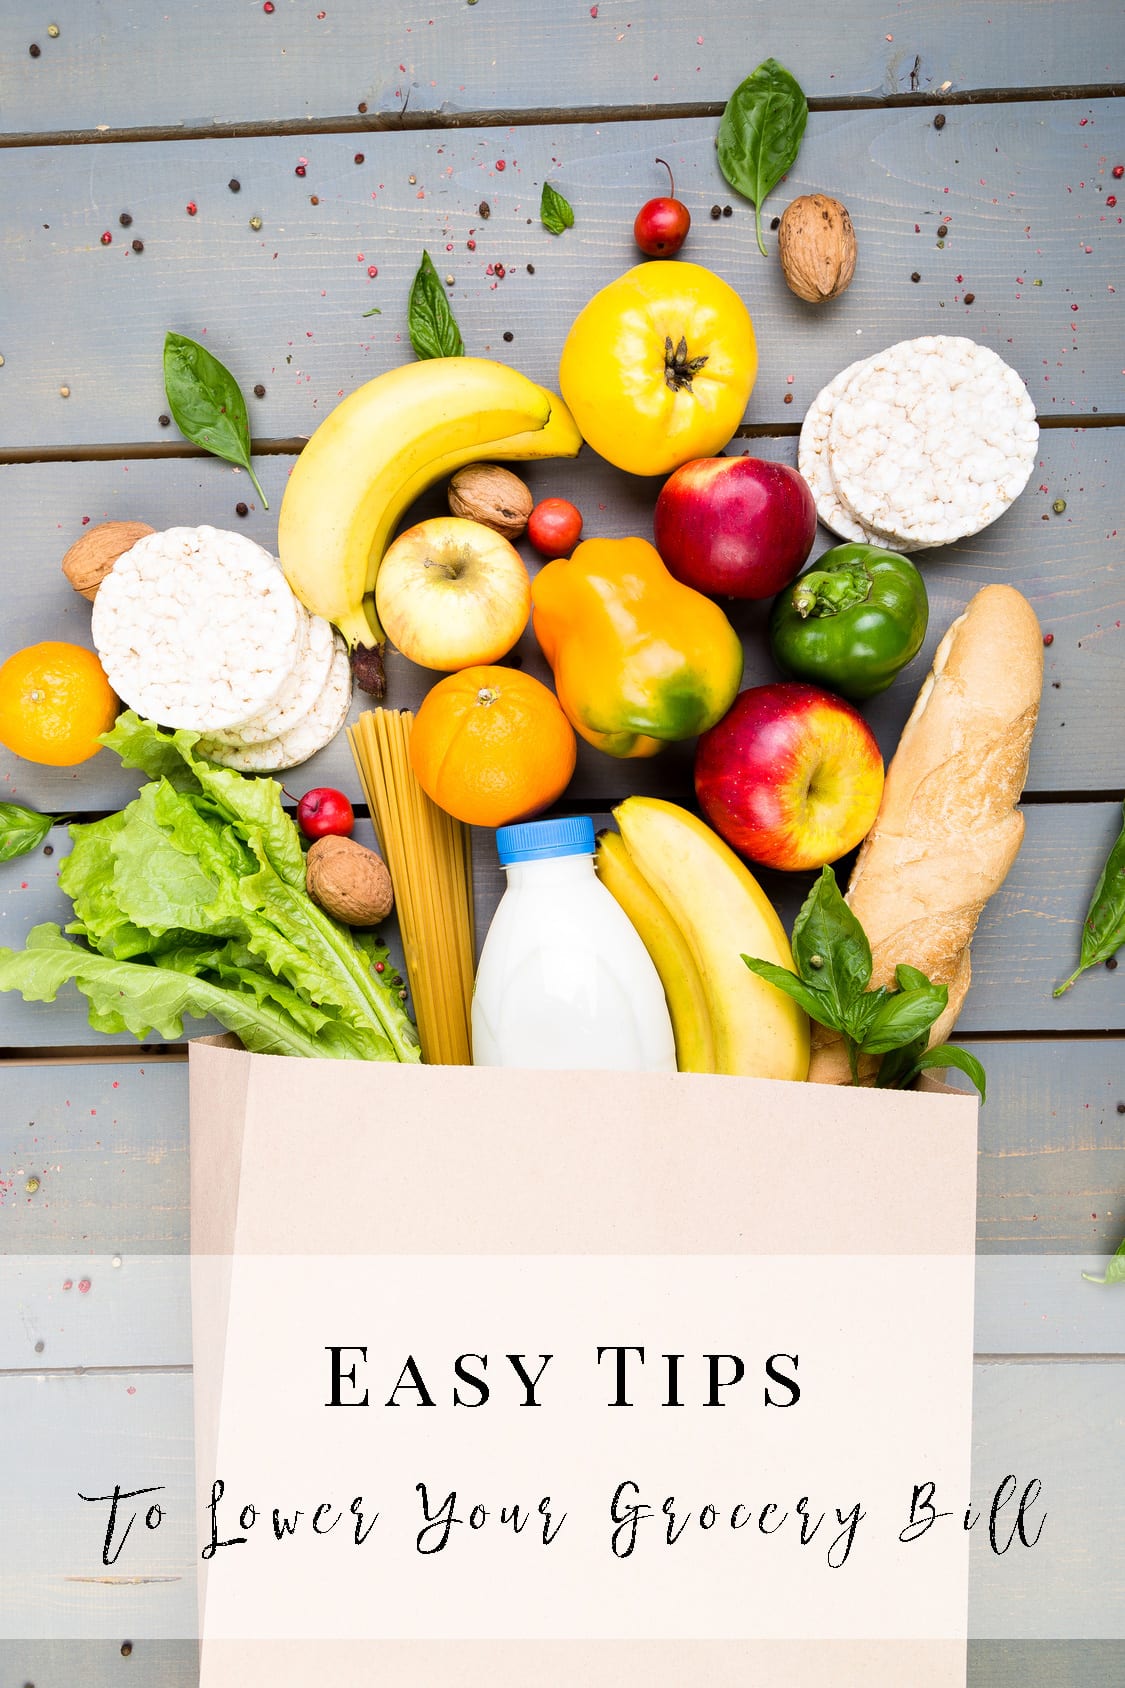 9 Easy Tips to Lower Your Grocery Budget without Coupons